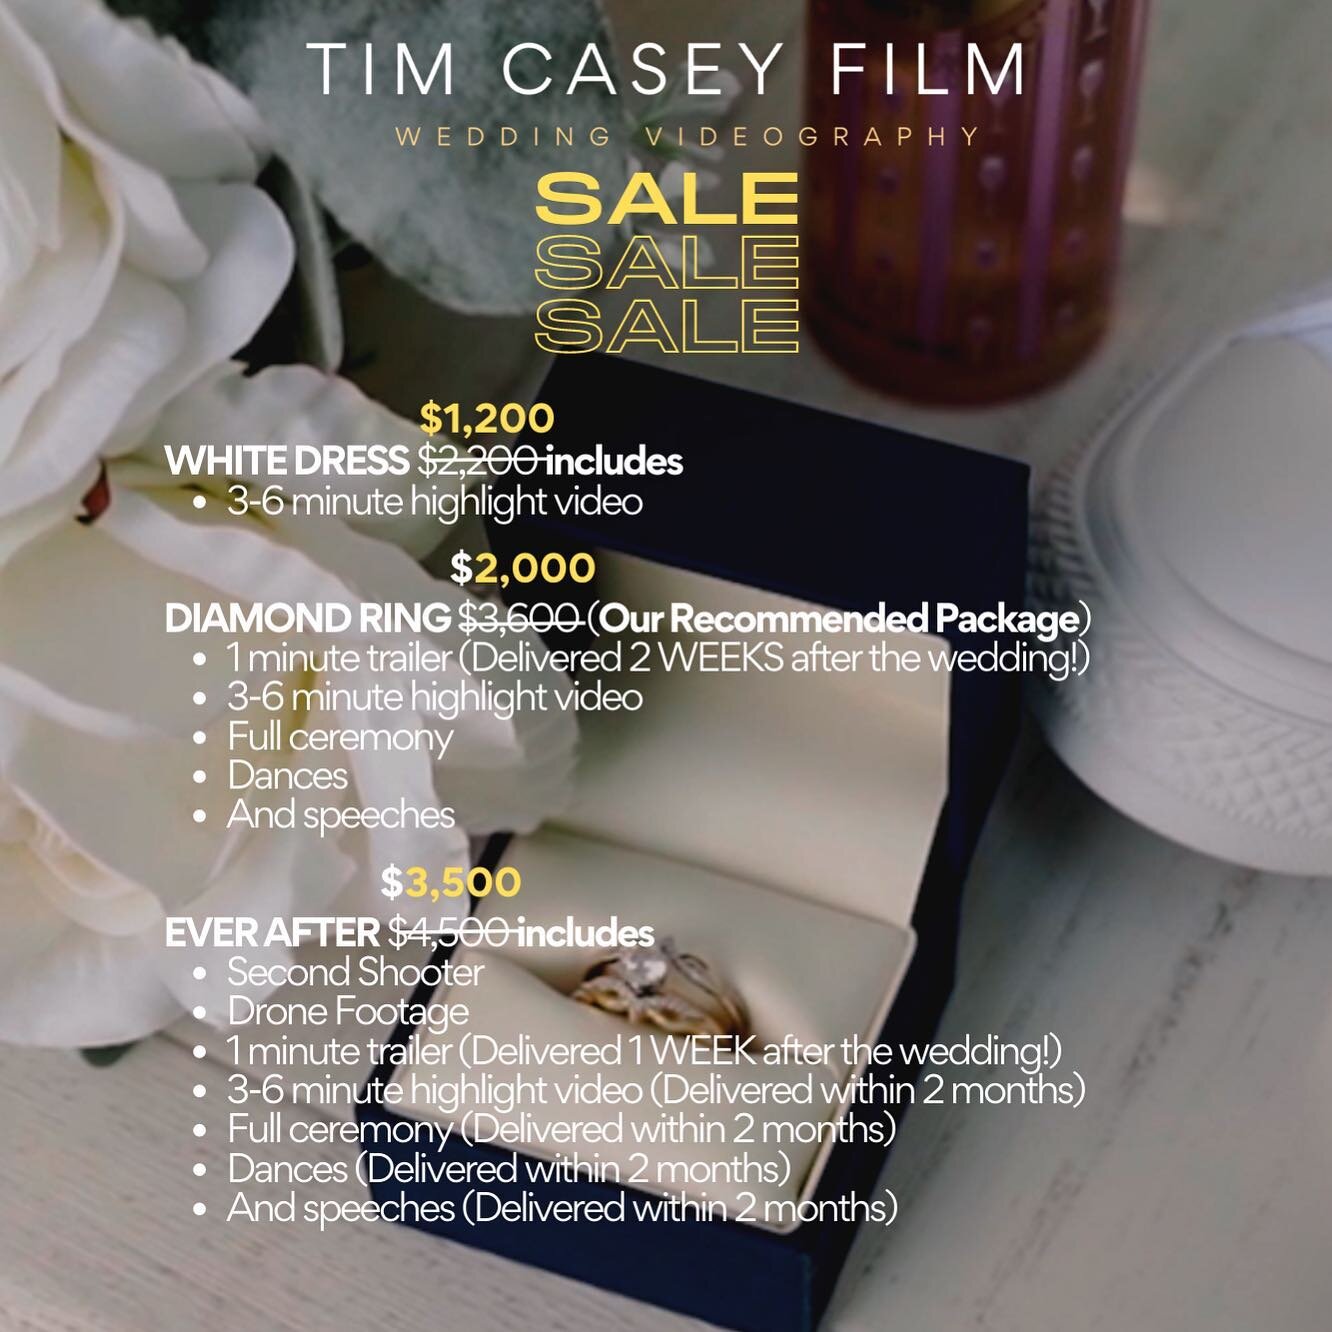 SALE! 
It&rsquo;s that time of the year where I offer an amazing deal for couples to have their most special day captured at an incredible price! 

This is a massive sale and it won&rsquo;t last forever, only for the next month! If you are looking fo